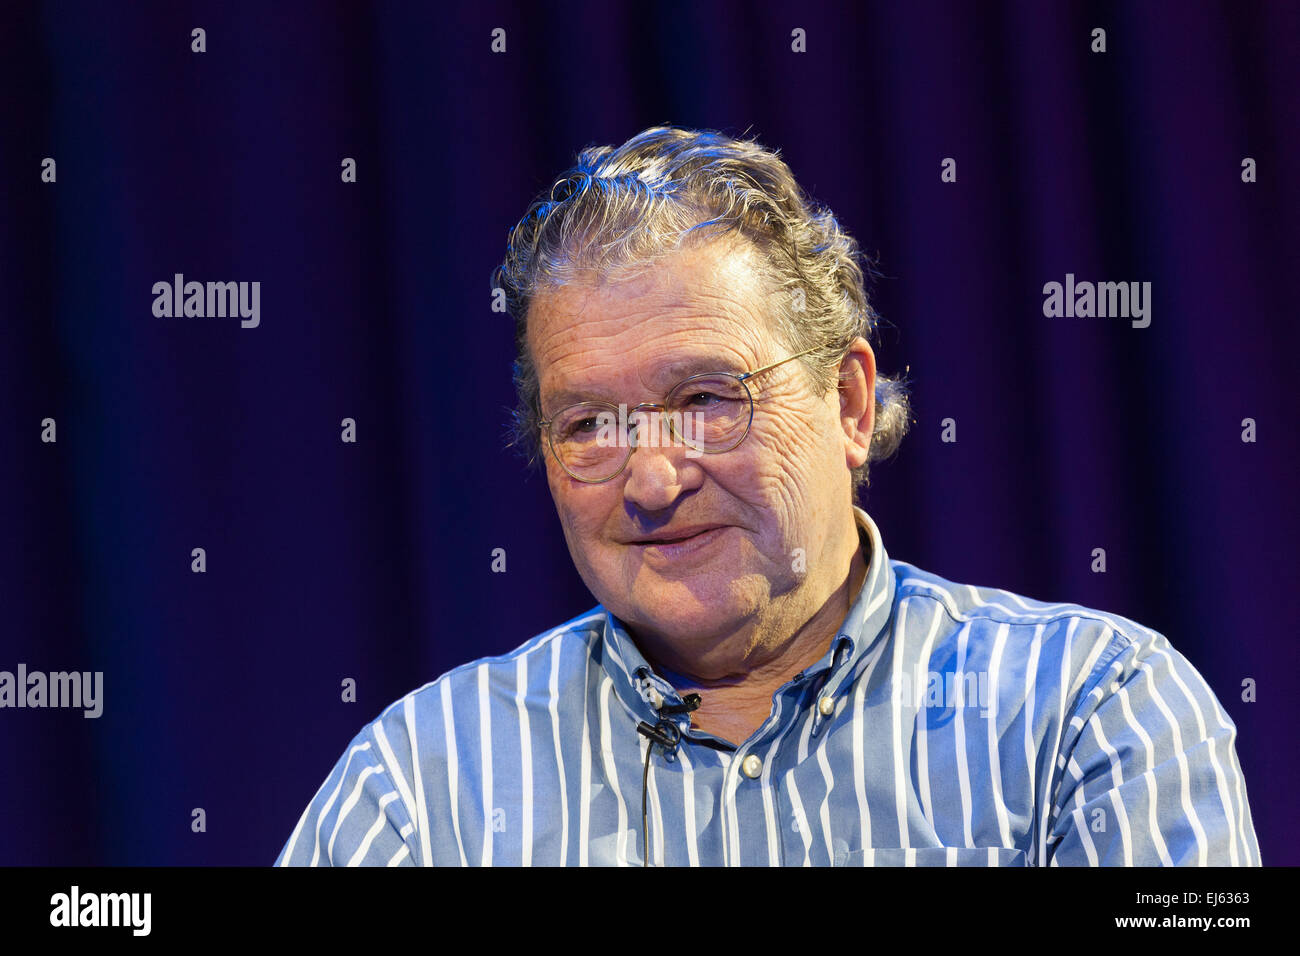 Walsall, West Midlands, UK. 22 March 2015. Clive Doig British television producer director BAFTA Award winner at a recording of ‘The David Hamilton Show’ for Big Centre TV. Hosted by presenter and broadcaster ‘Diddy’ David Hamilton the show features famous personalities from across the music and television spectrum. Credit:  John Henshall / Alamy Live News PER0536 Stock Photo